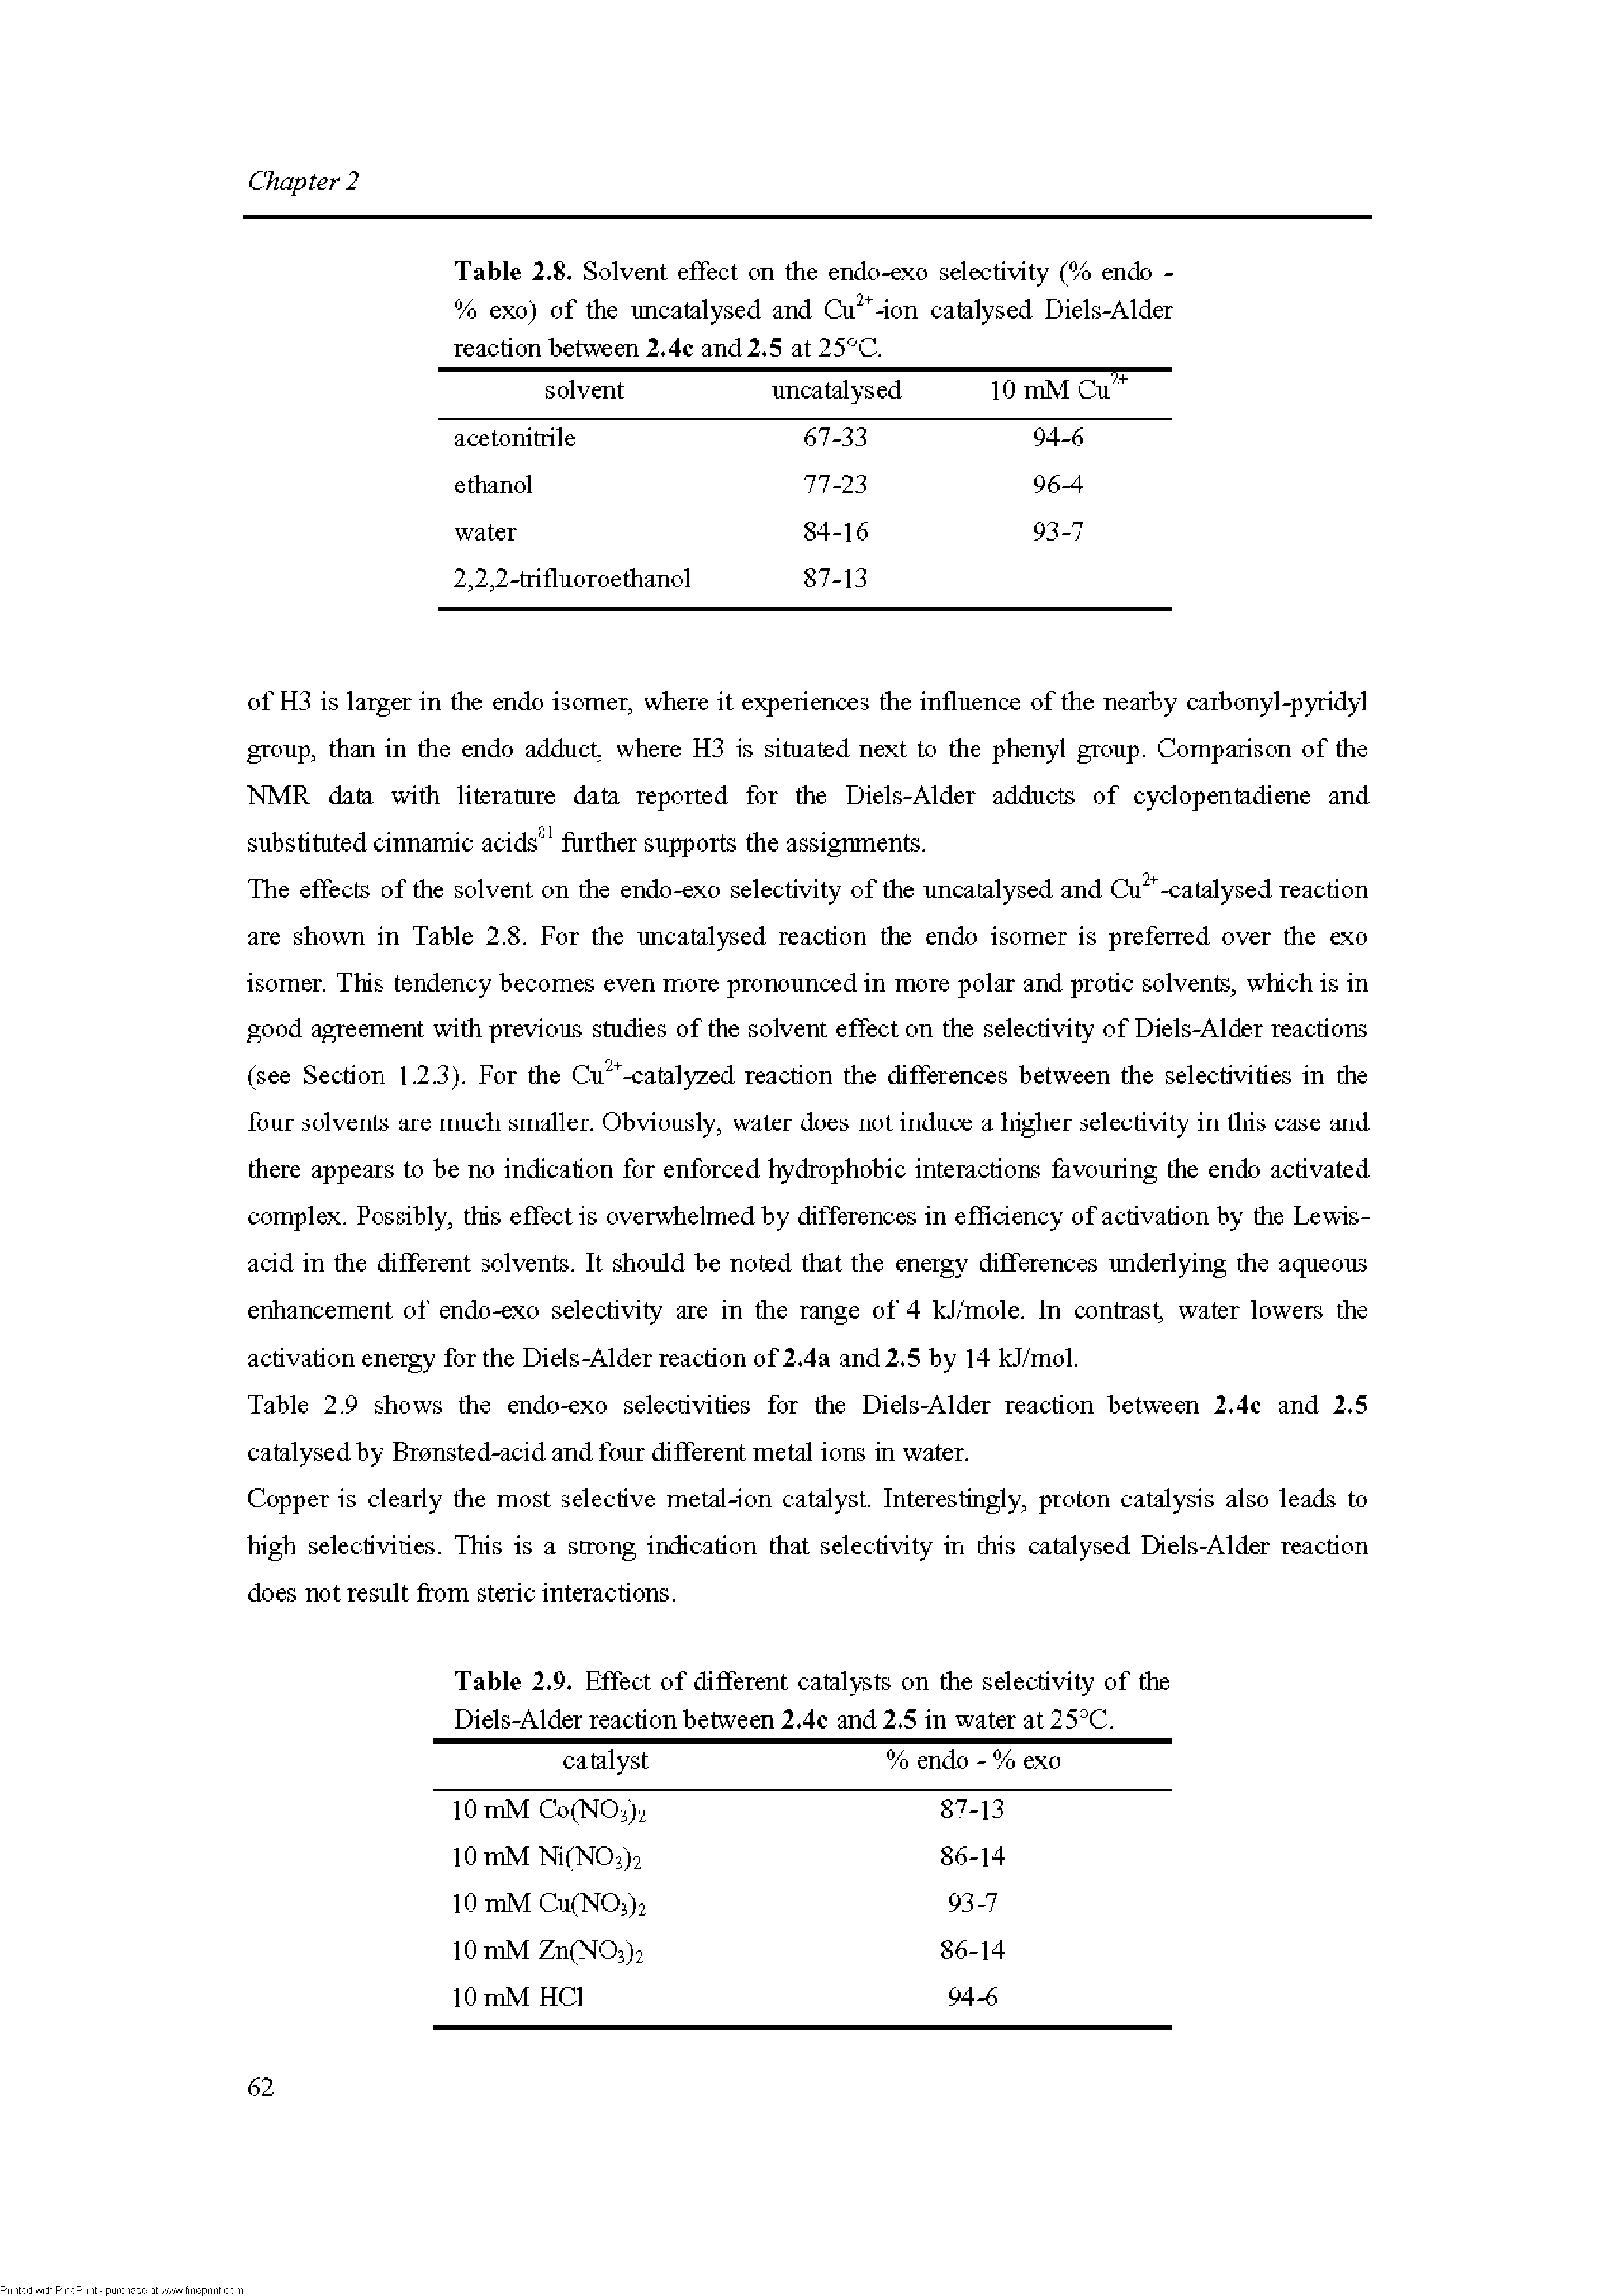 Table 2,8, Solvent effect on the endo-exo selectivity (% endo -% exo) of the nncatalysed and Cu" -ion catalysed Diels-Alder reaction between 2,4c and 2,5 at 25°C.